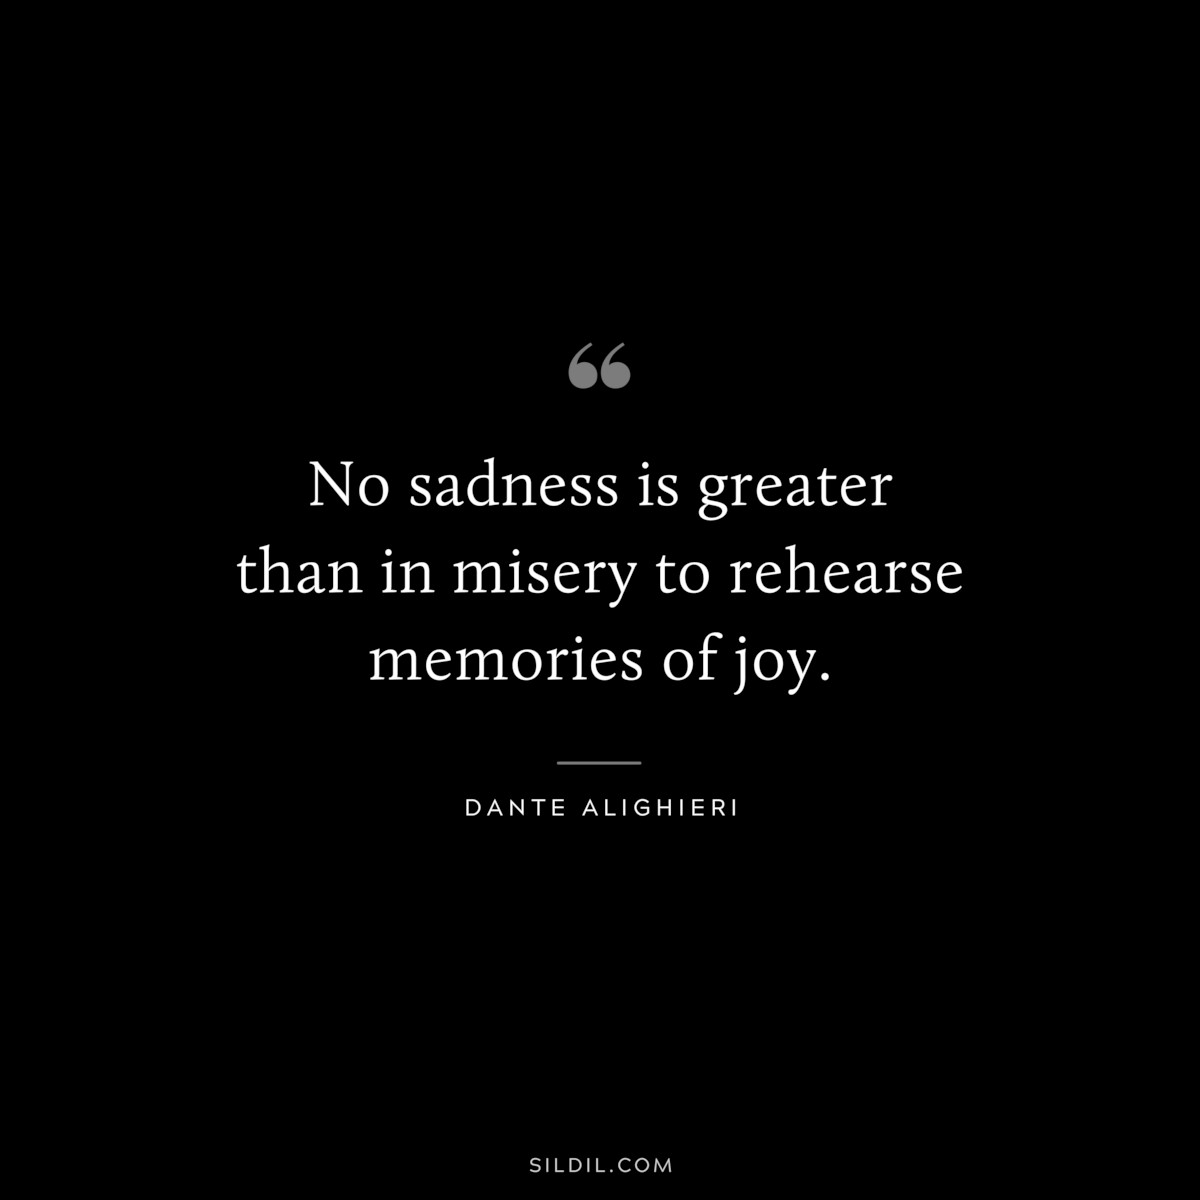 No sadness is greater than in misery to rehearse memories of joy. ― Dante Alighieri